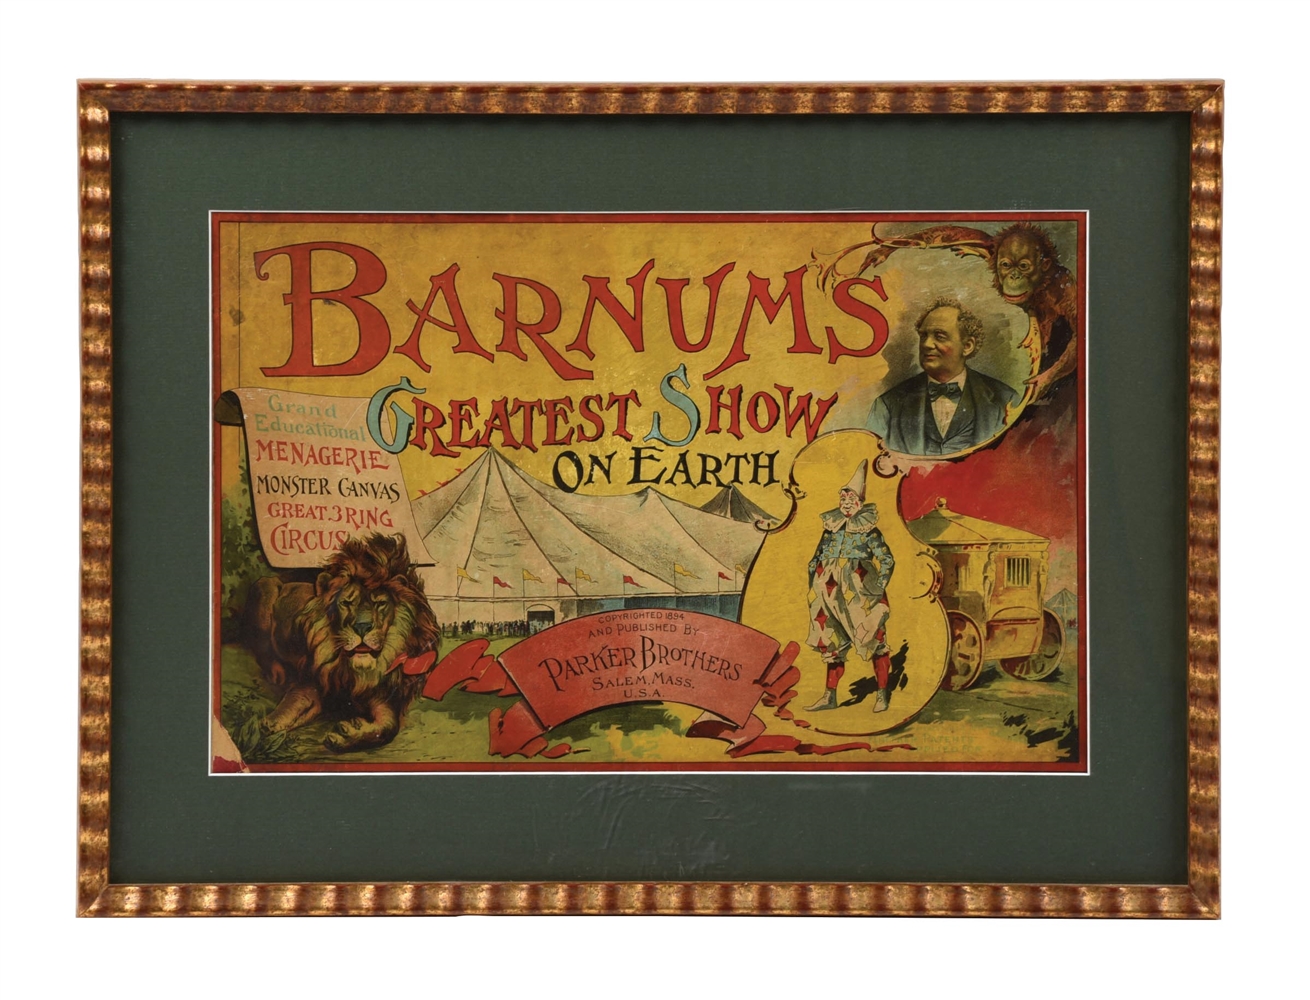 BARNUMS "GREATEST SHOW ON EARTH" BOARD GAME BOX TOP W/ CIRCUS GRAPHICS